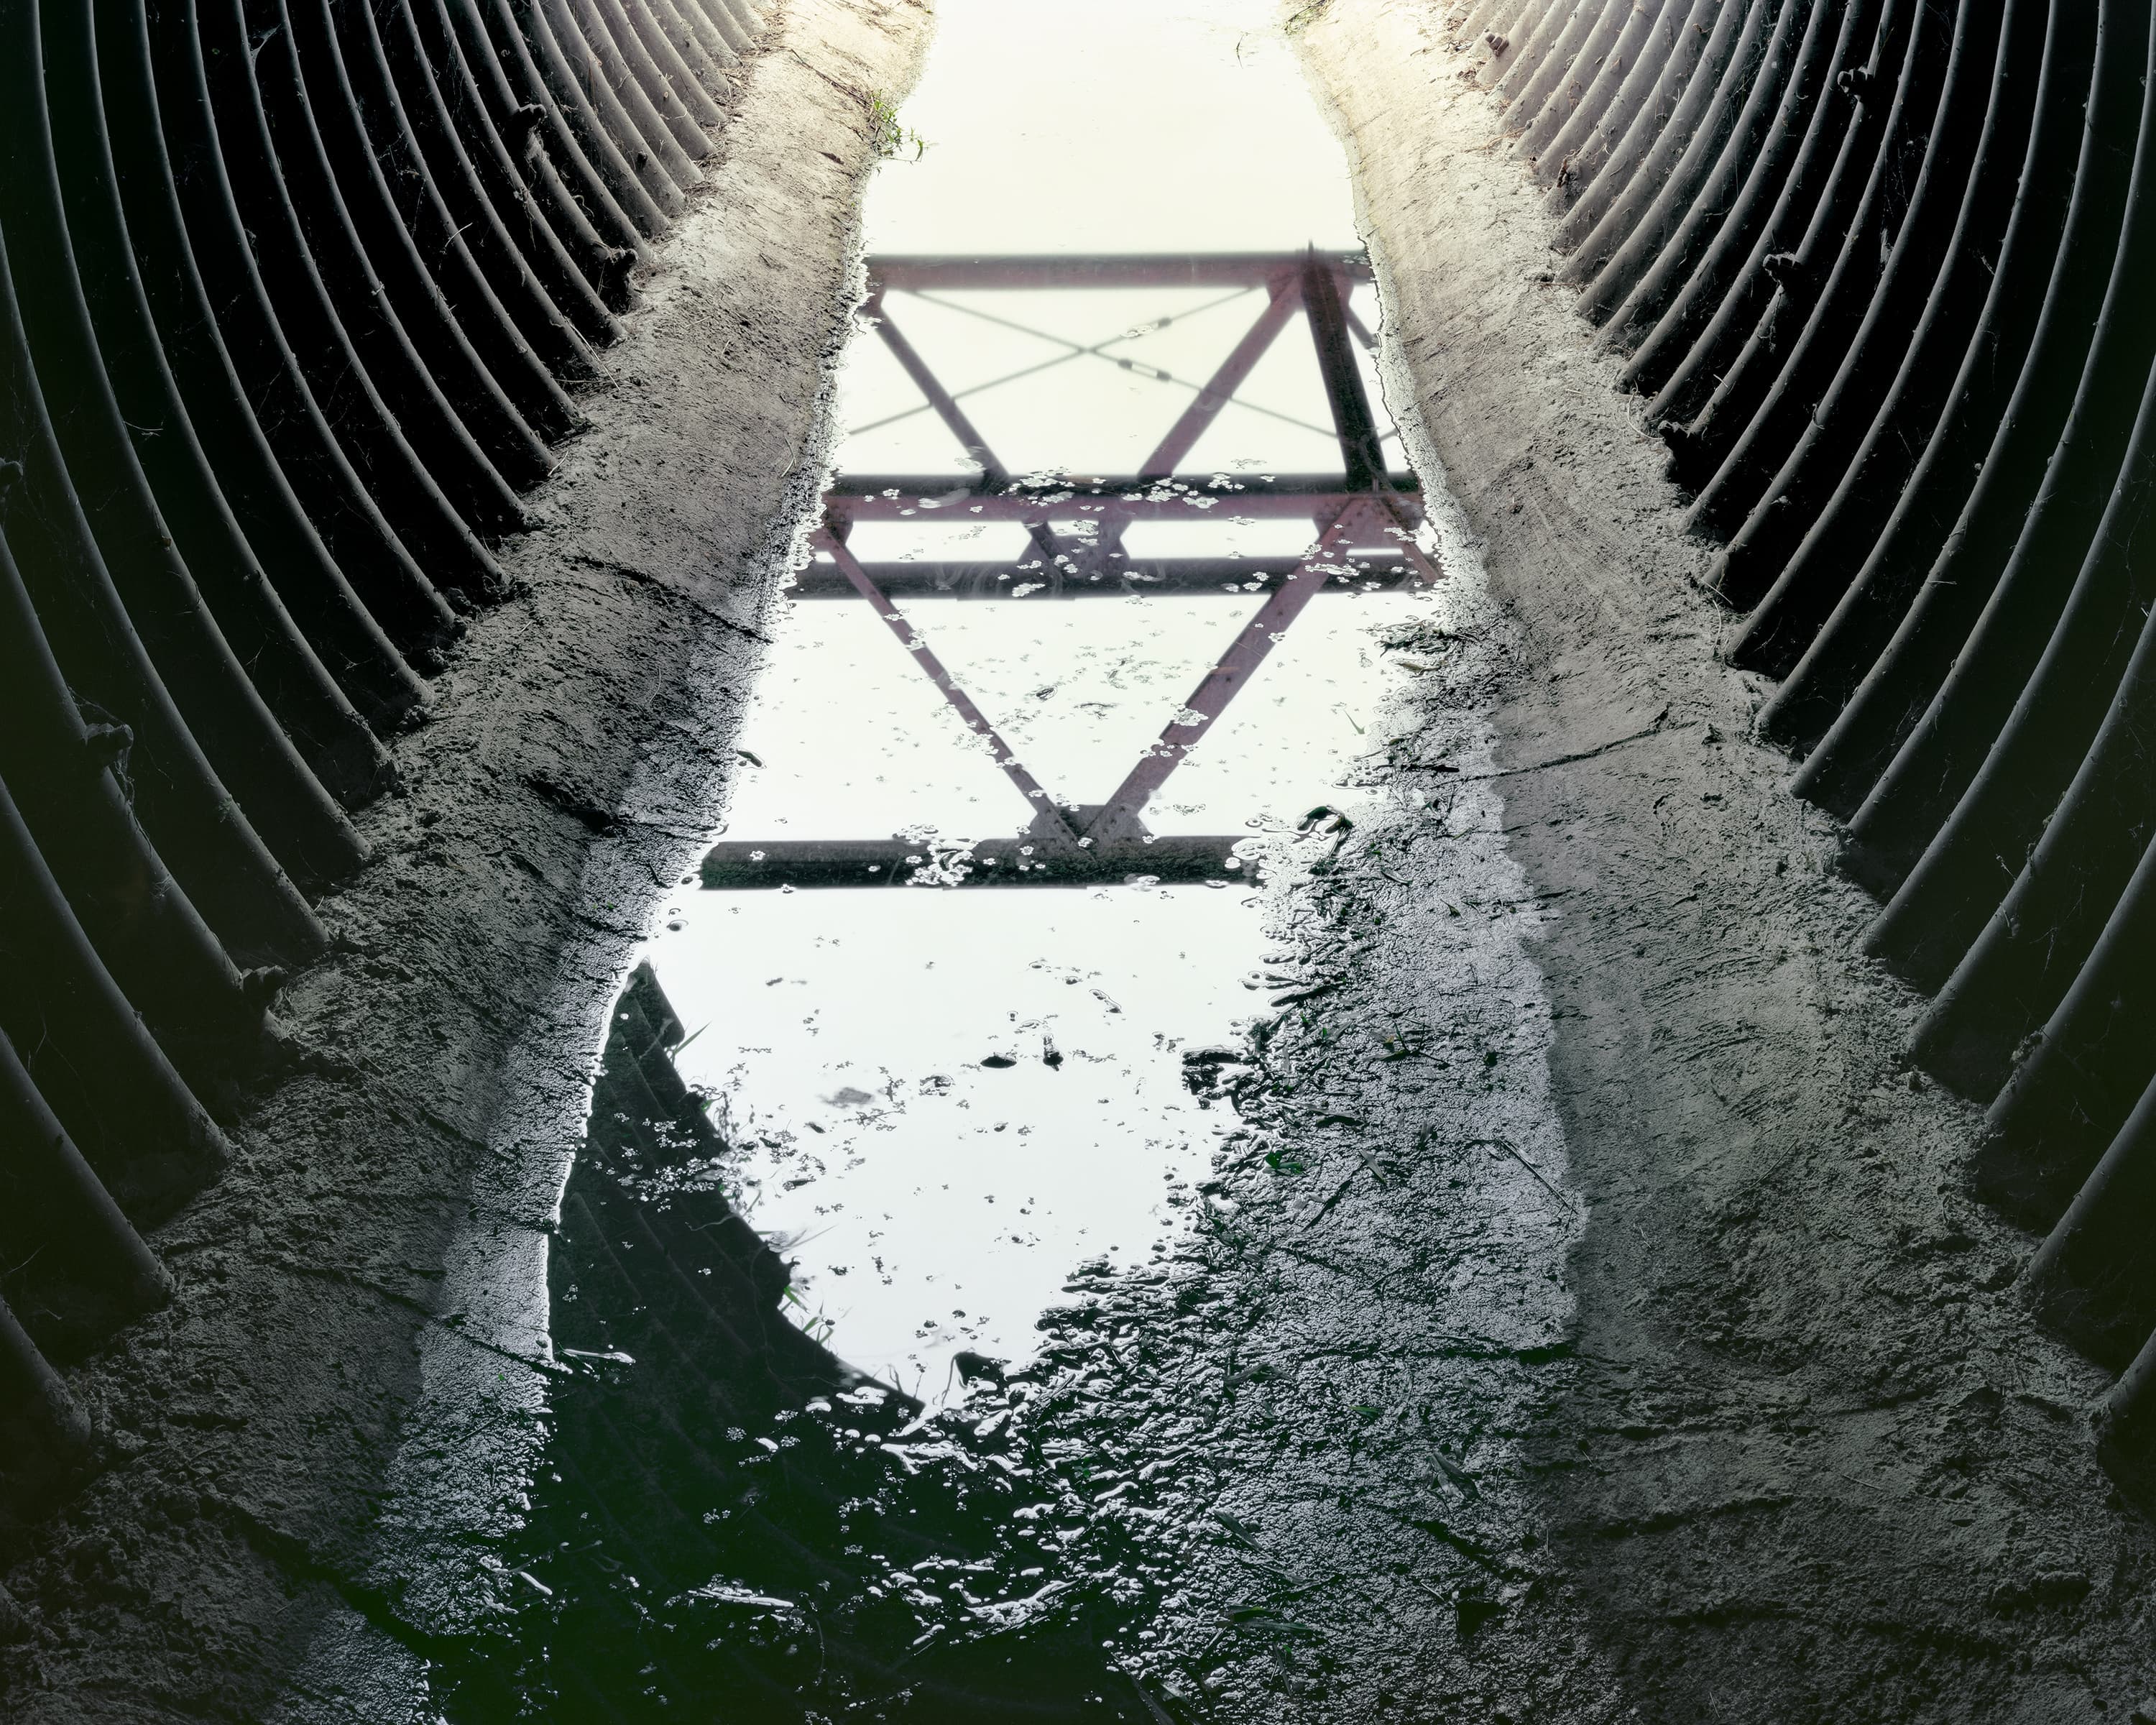 Interior of a metal pipe culvert filled with shallow water, in the reflection in the water the frame of an abandoned bridge is visible.